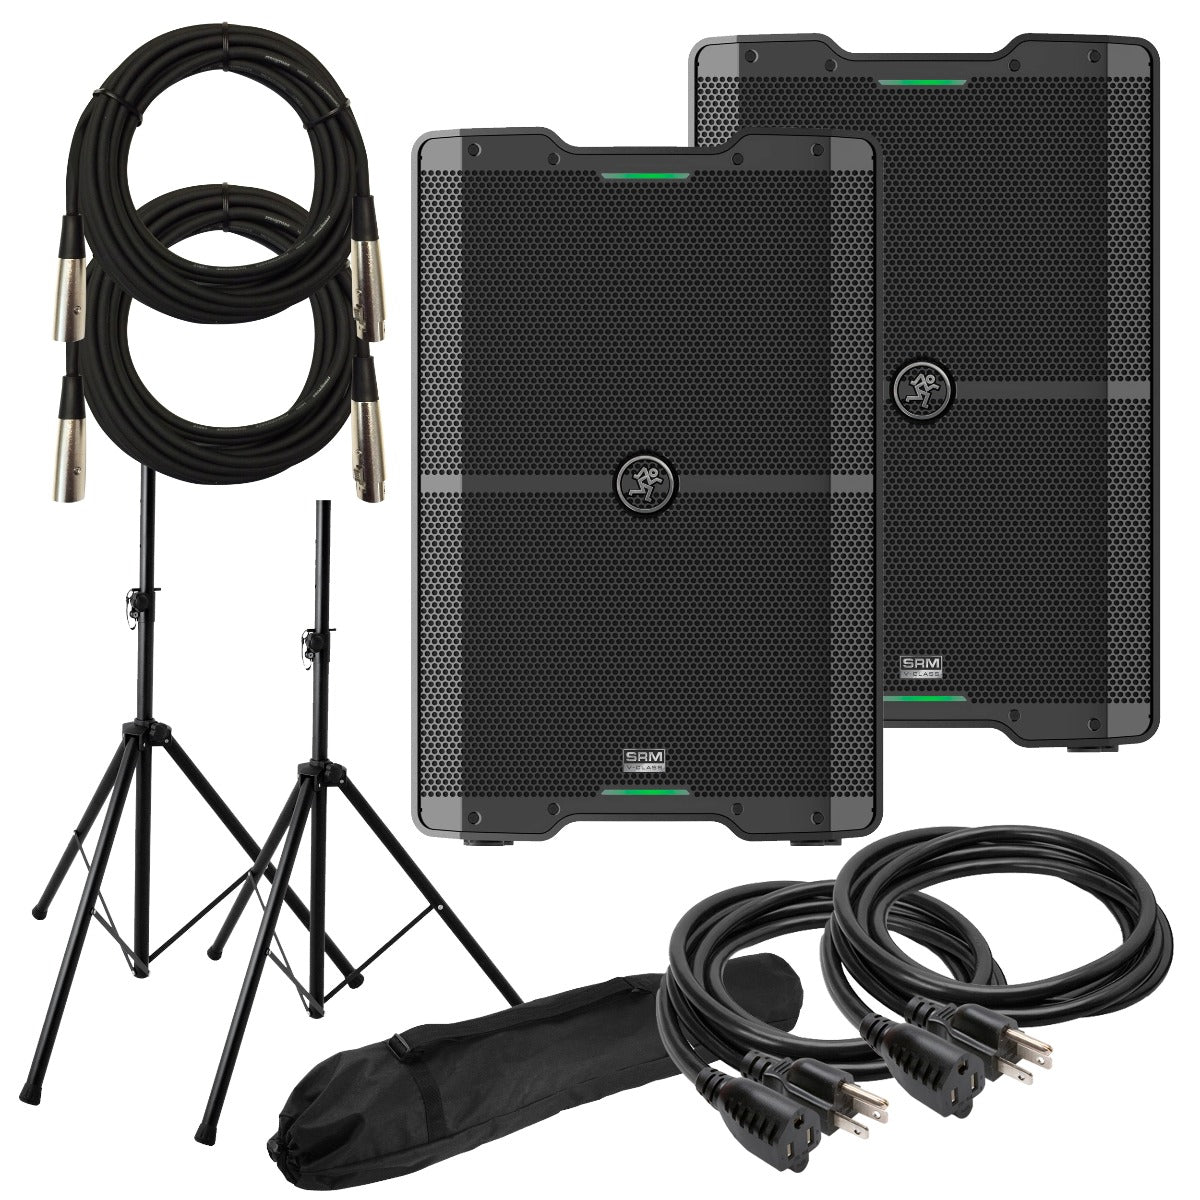 Collage of two Mackie SRM210 V-Class speakers with two stands, XLR cables, and power cables, as well as a carry bag for the stands.